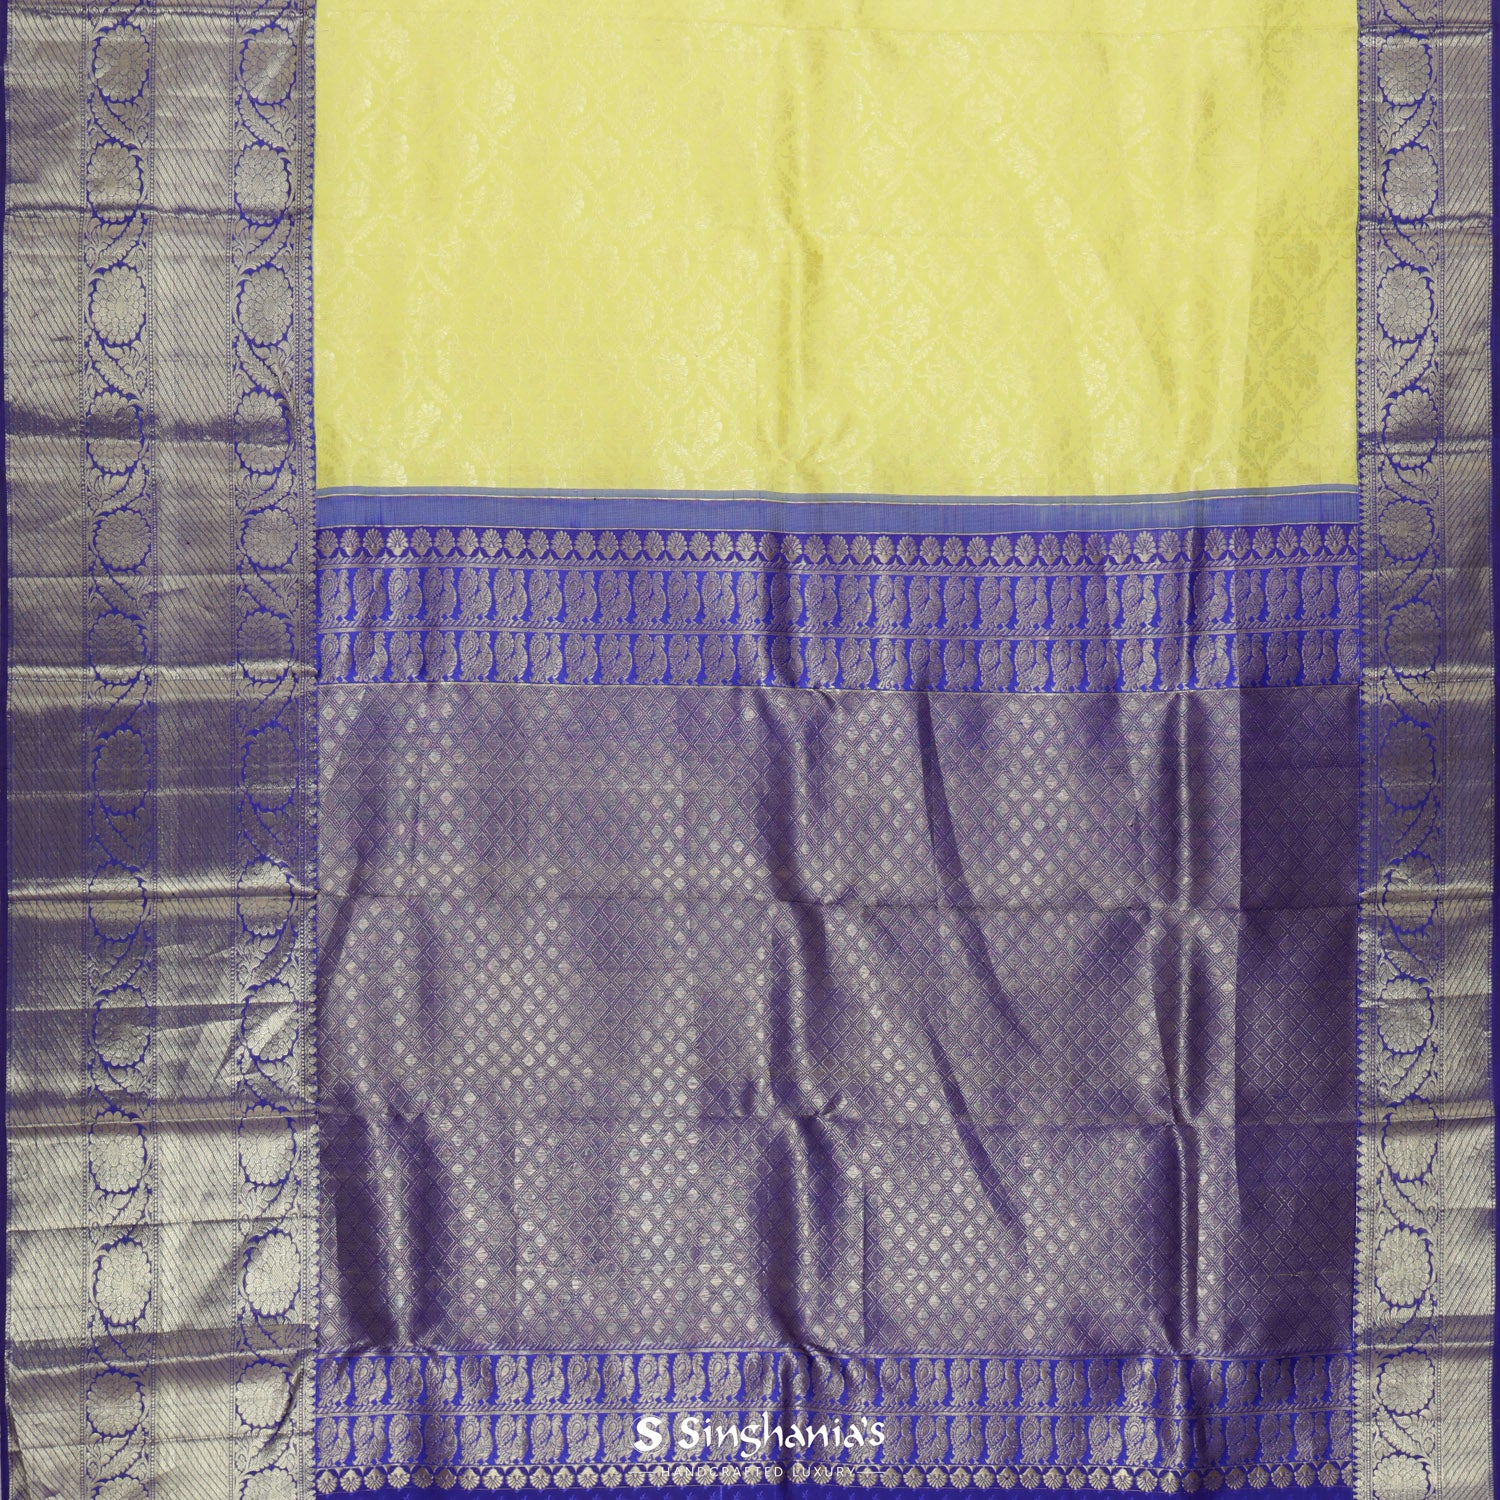 Pale Yellow Kanchi Saree With Floral Jaal Pattern